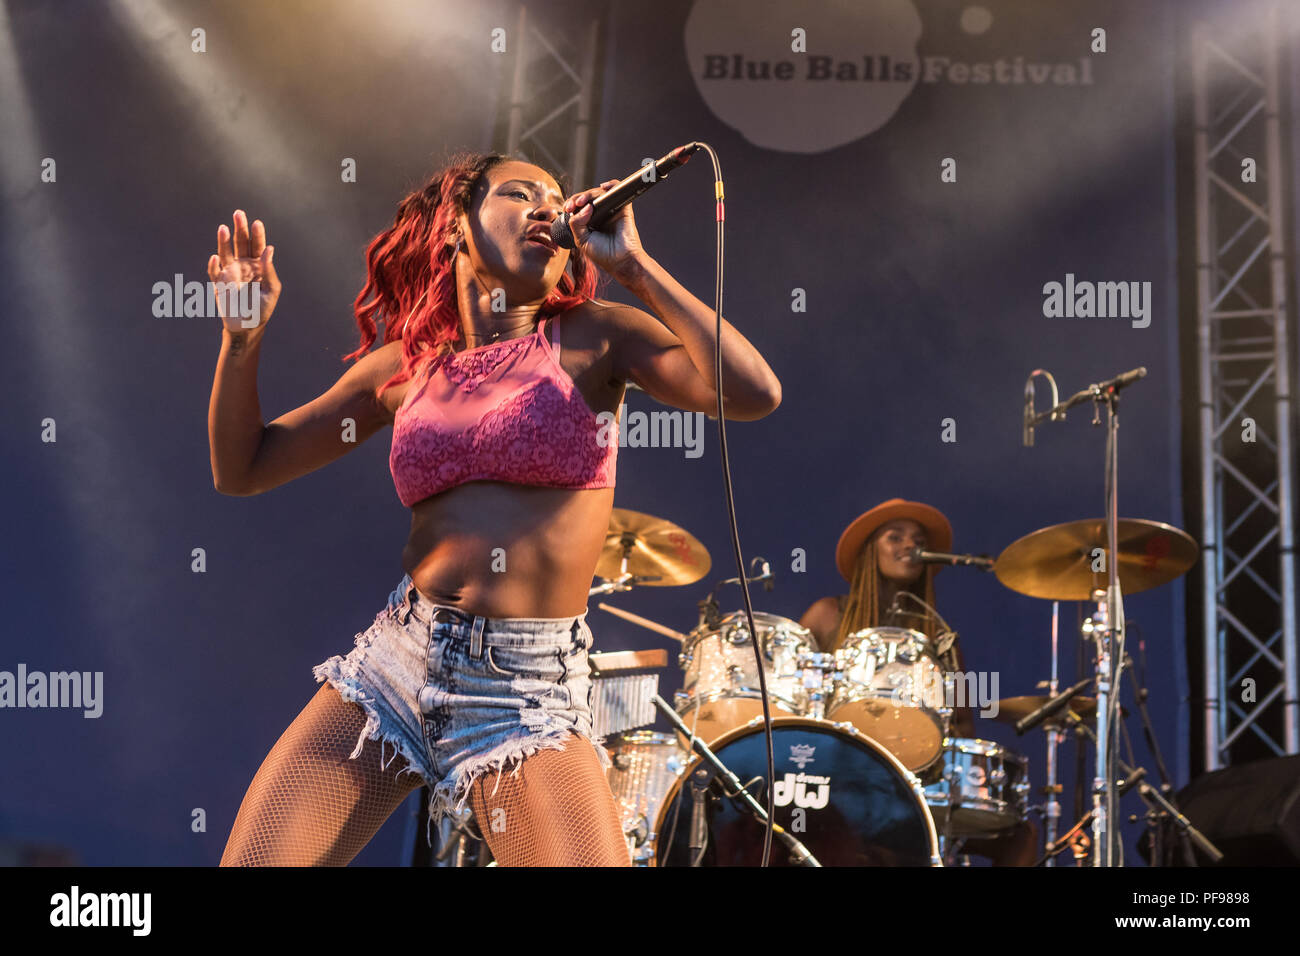 The American blues rock band Southern Avenue with singer Tierinii Jackson live at the 26th Blue Balls Festival in Lucerne Stock Photo